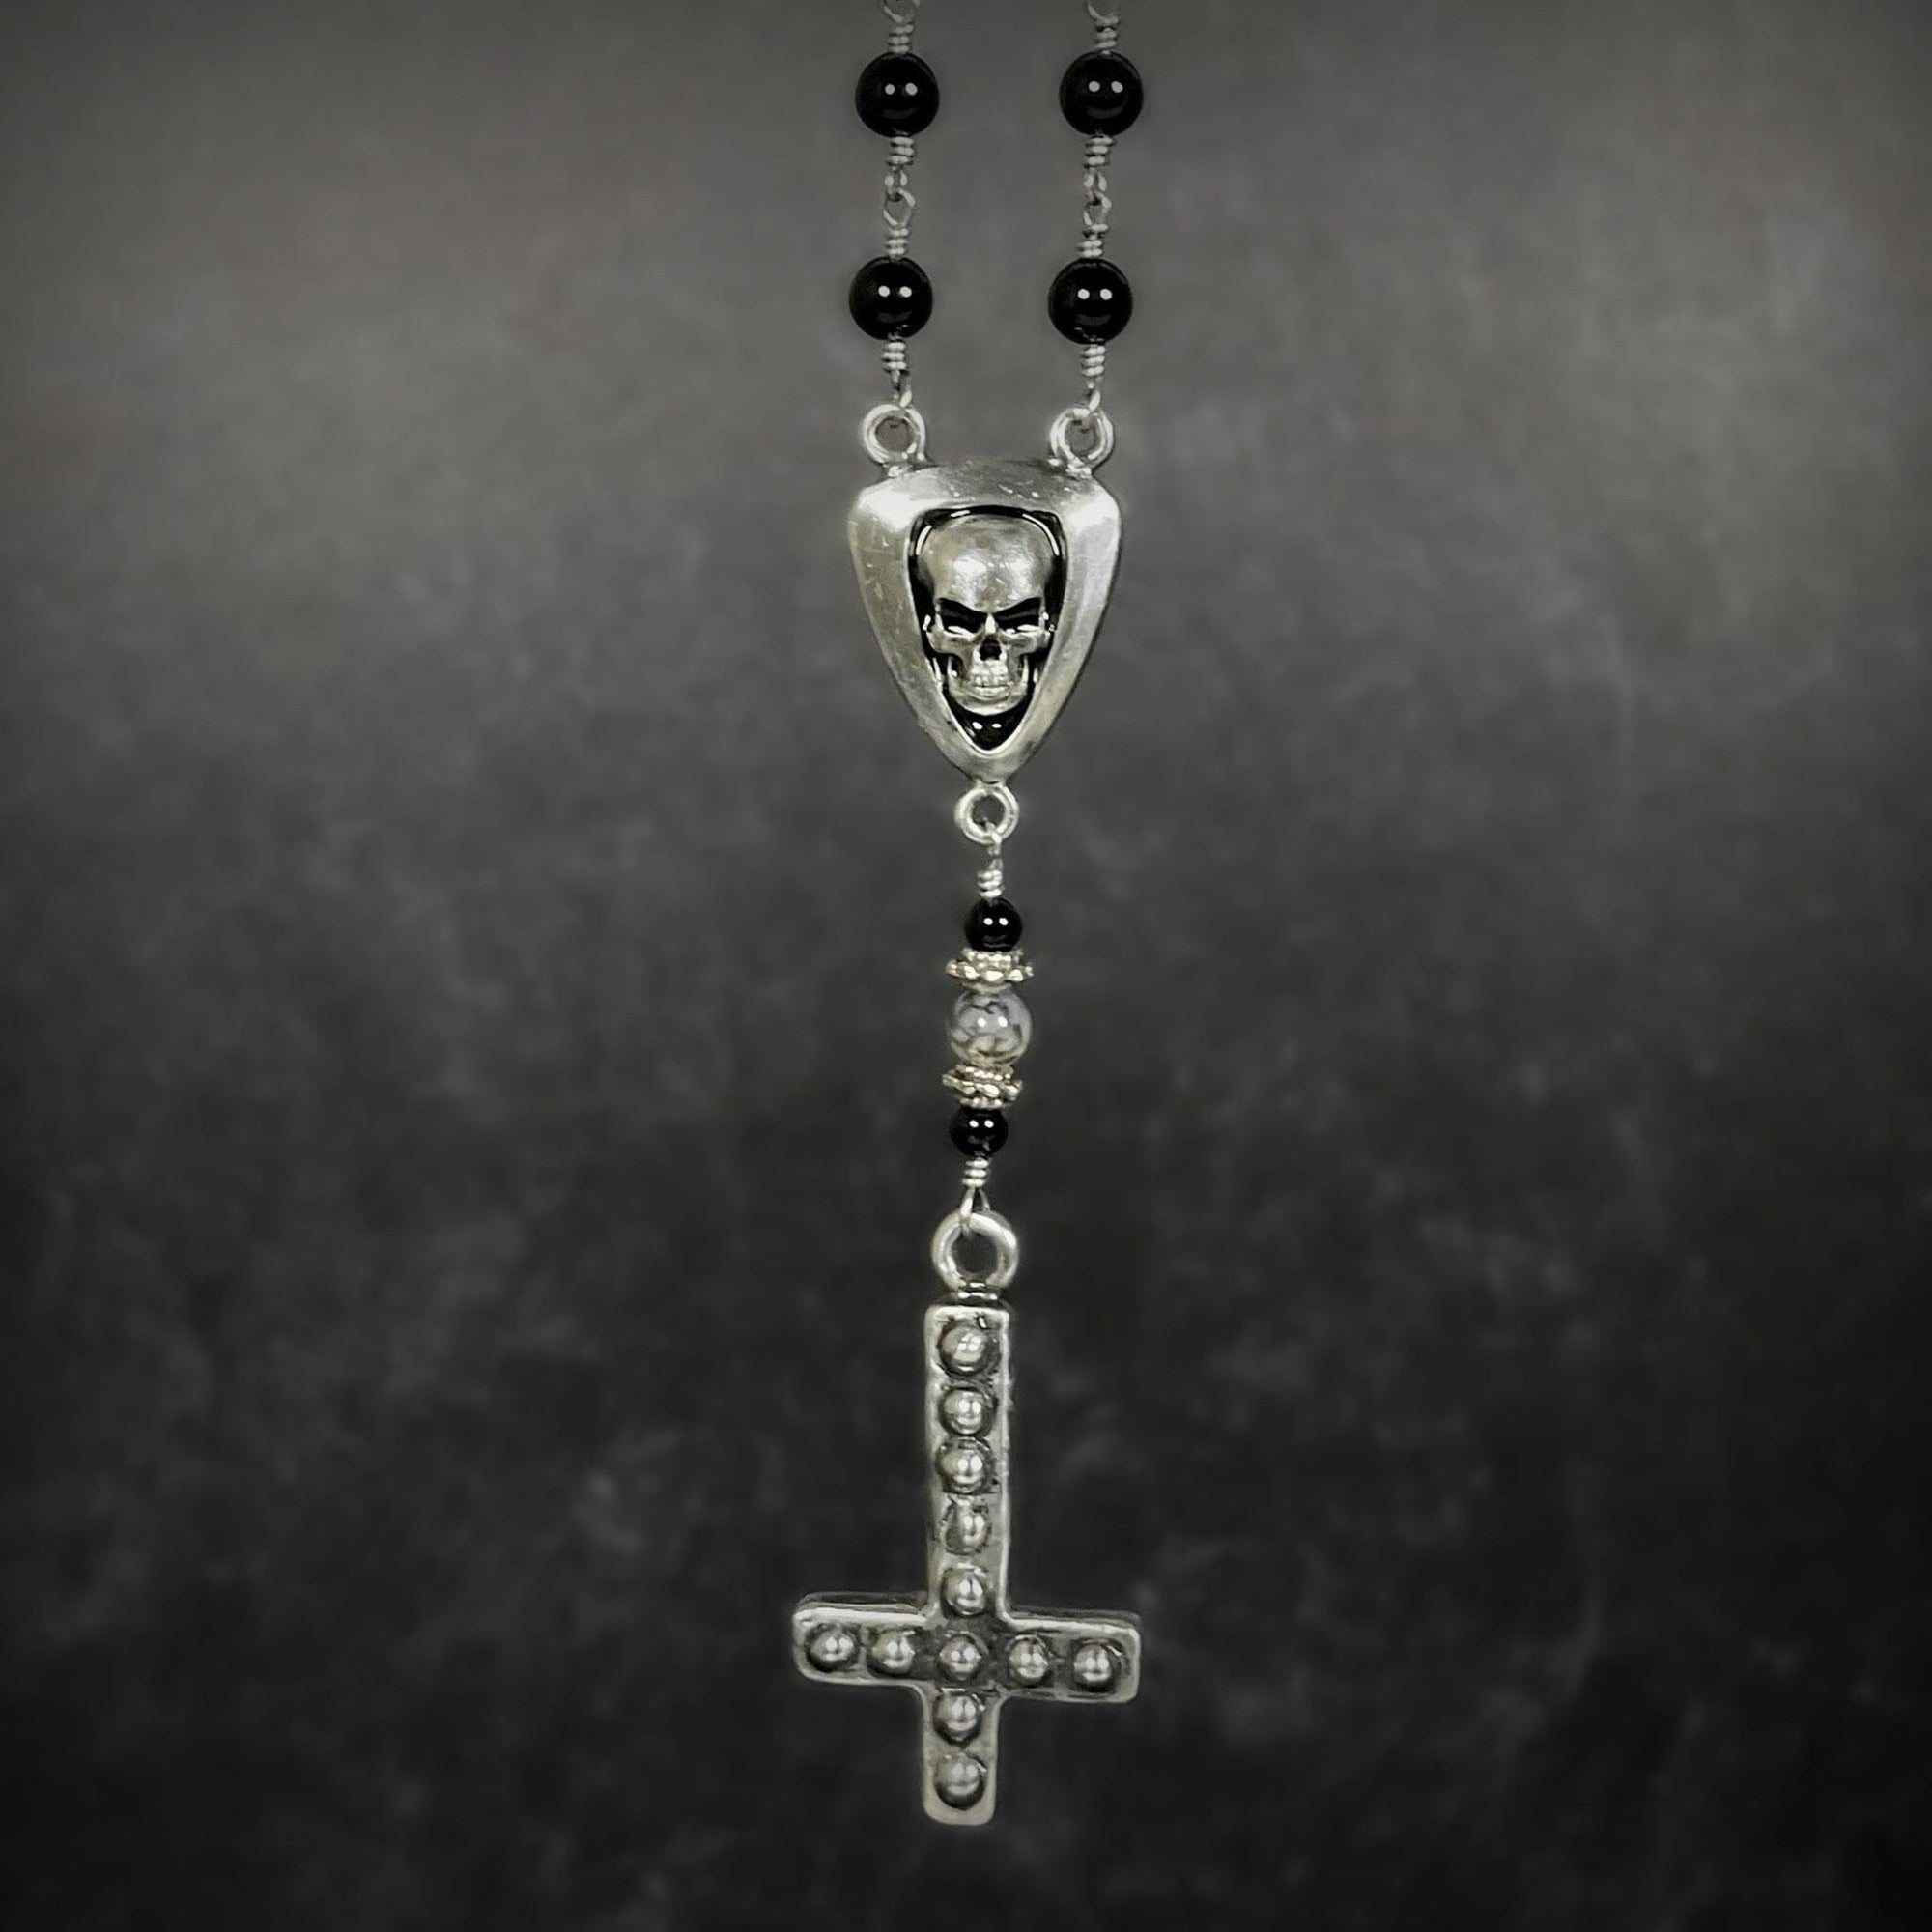 Inverted cross rosary necklace by rock my wings